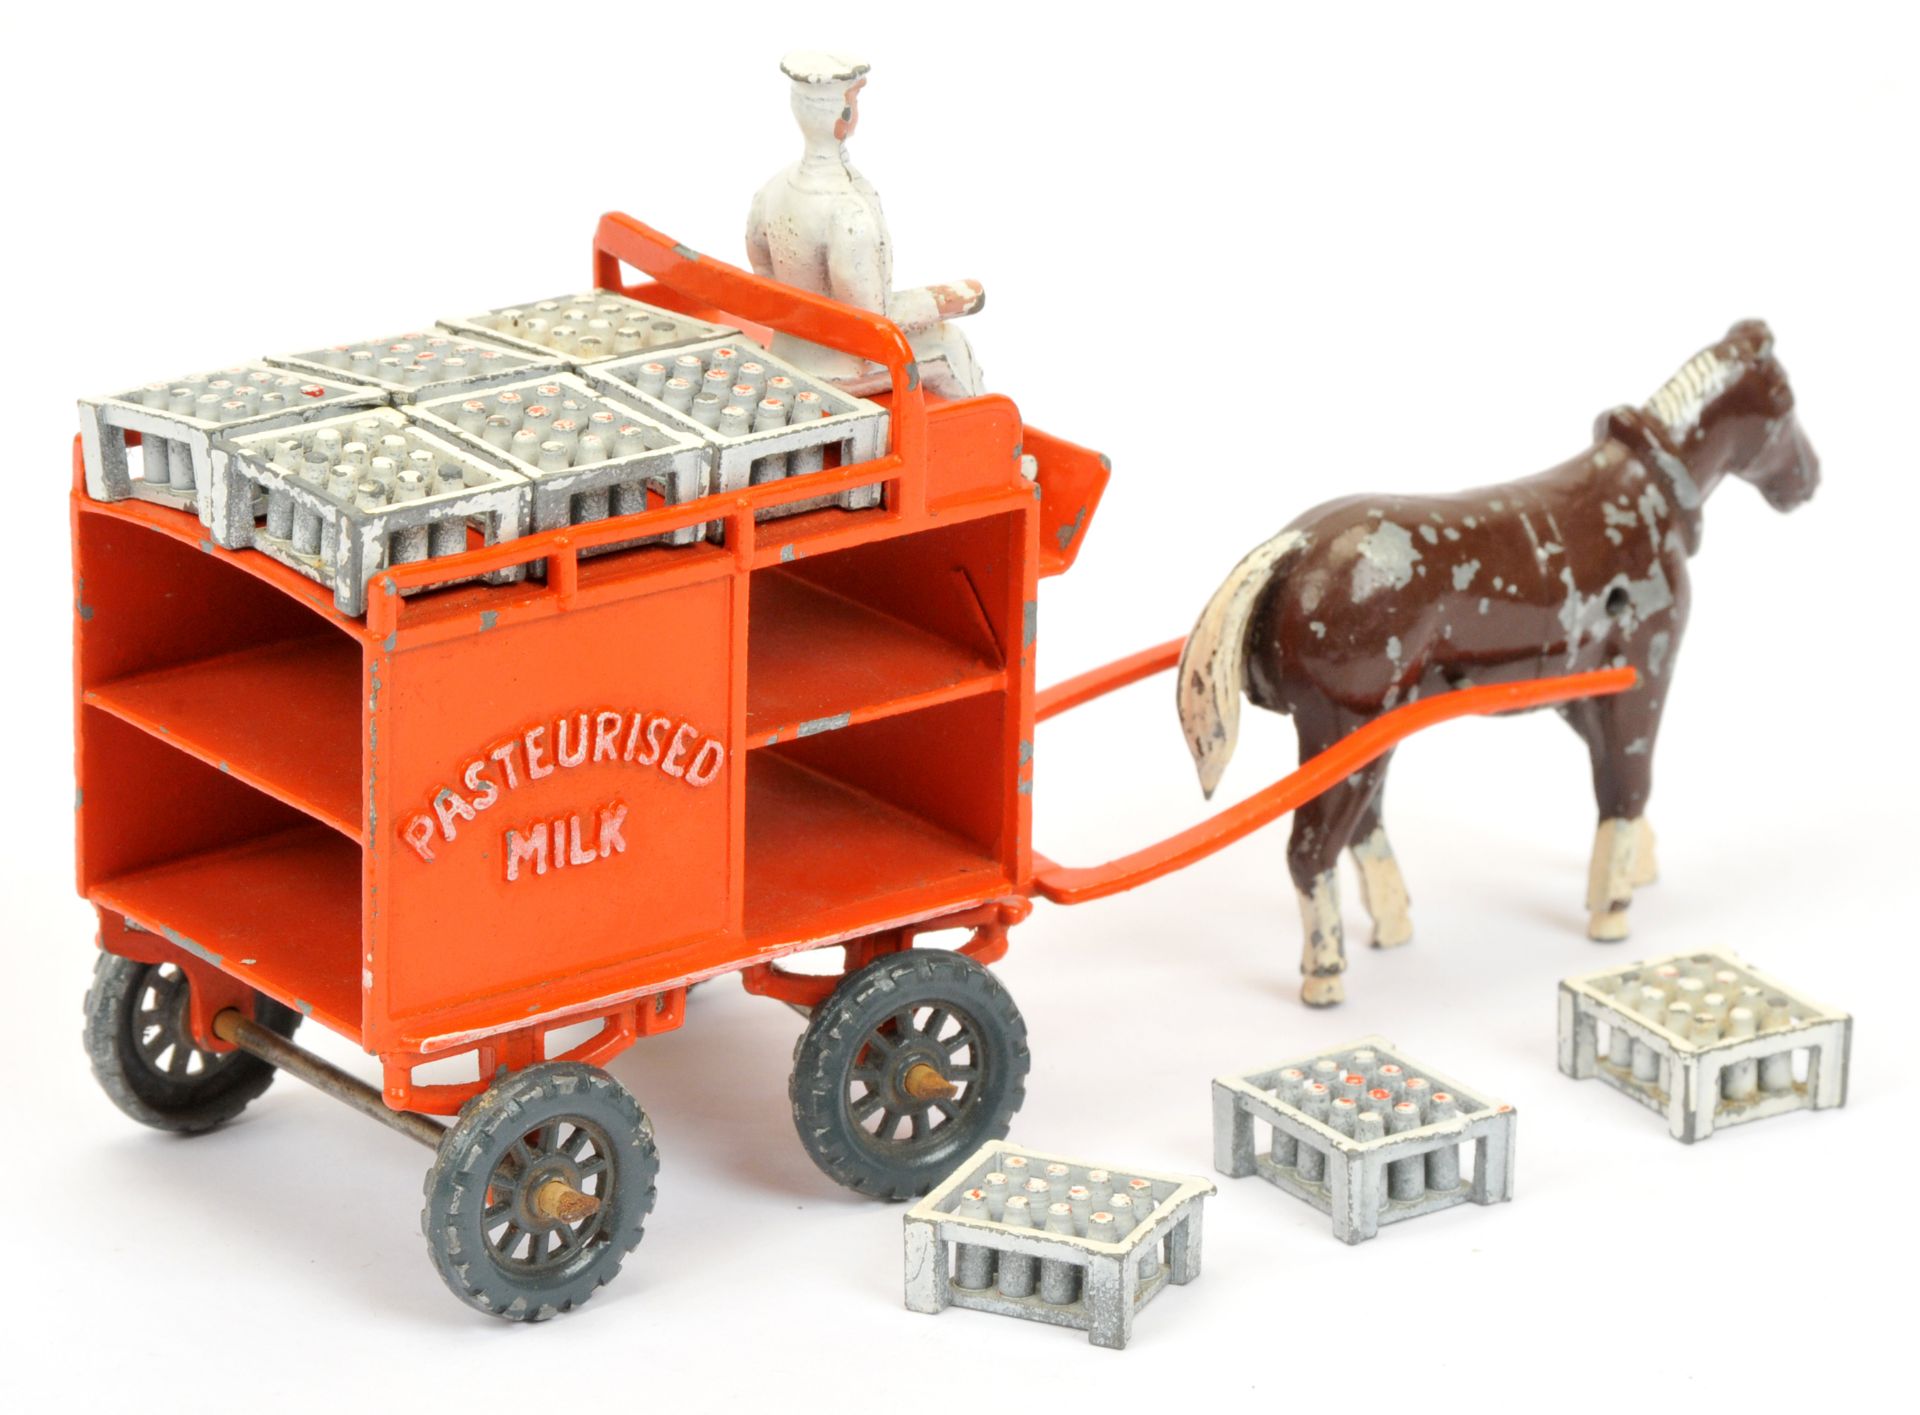 Matchbox Early Moko Lesney Toys large scale Horse Drawn Milk Float - orange float complete with 9... - Image 2 of 2